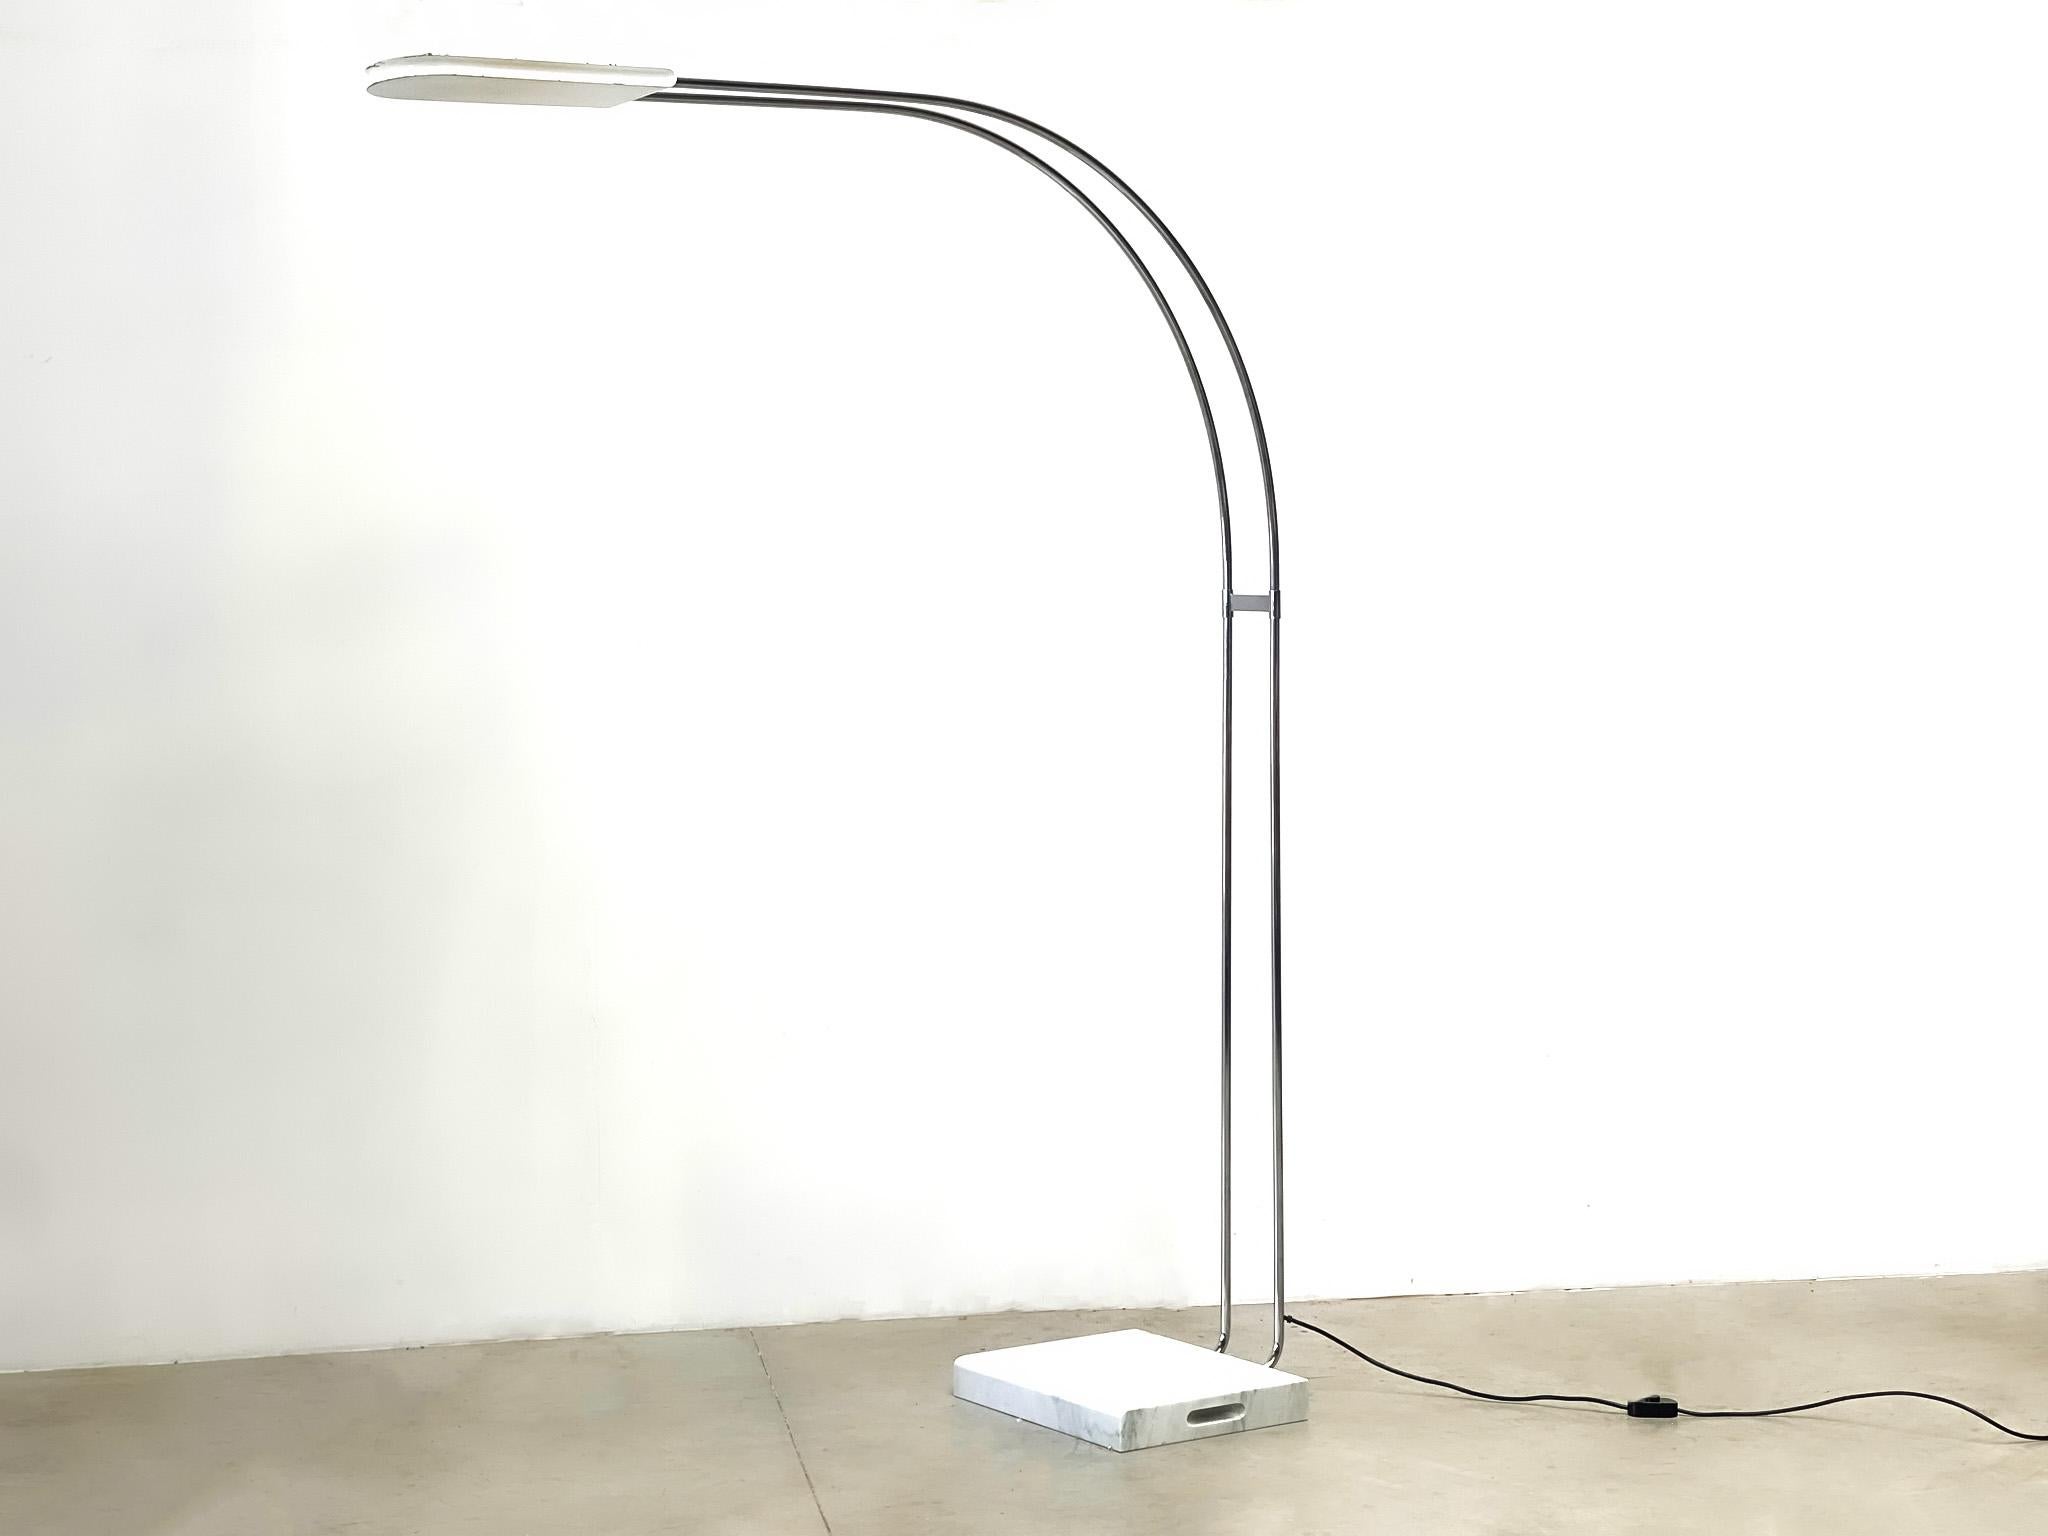 What a lamp!

 

XL lamp by Bruno Gecchelin This lamp is called the Gesto Terra floor lamp. The lamp was made by Gruppo Skipper in 1974. This model is a very exceptional and rare model. It is an xl version with a beautiful carrera marble base and in